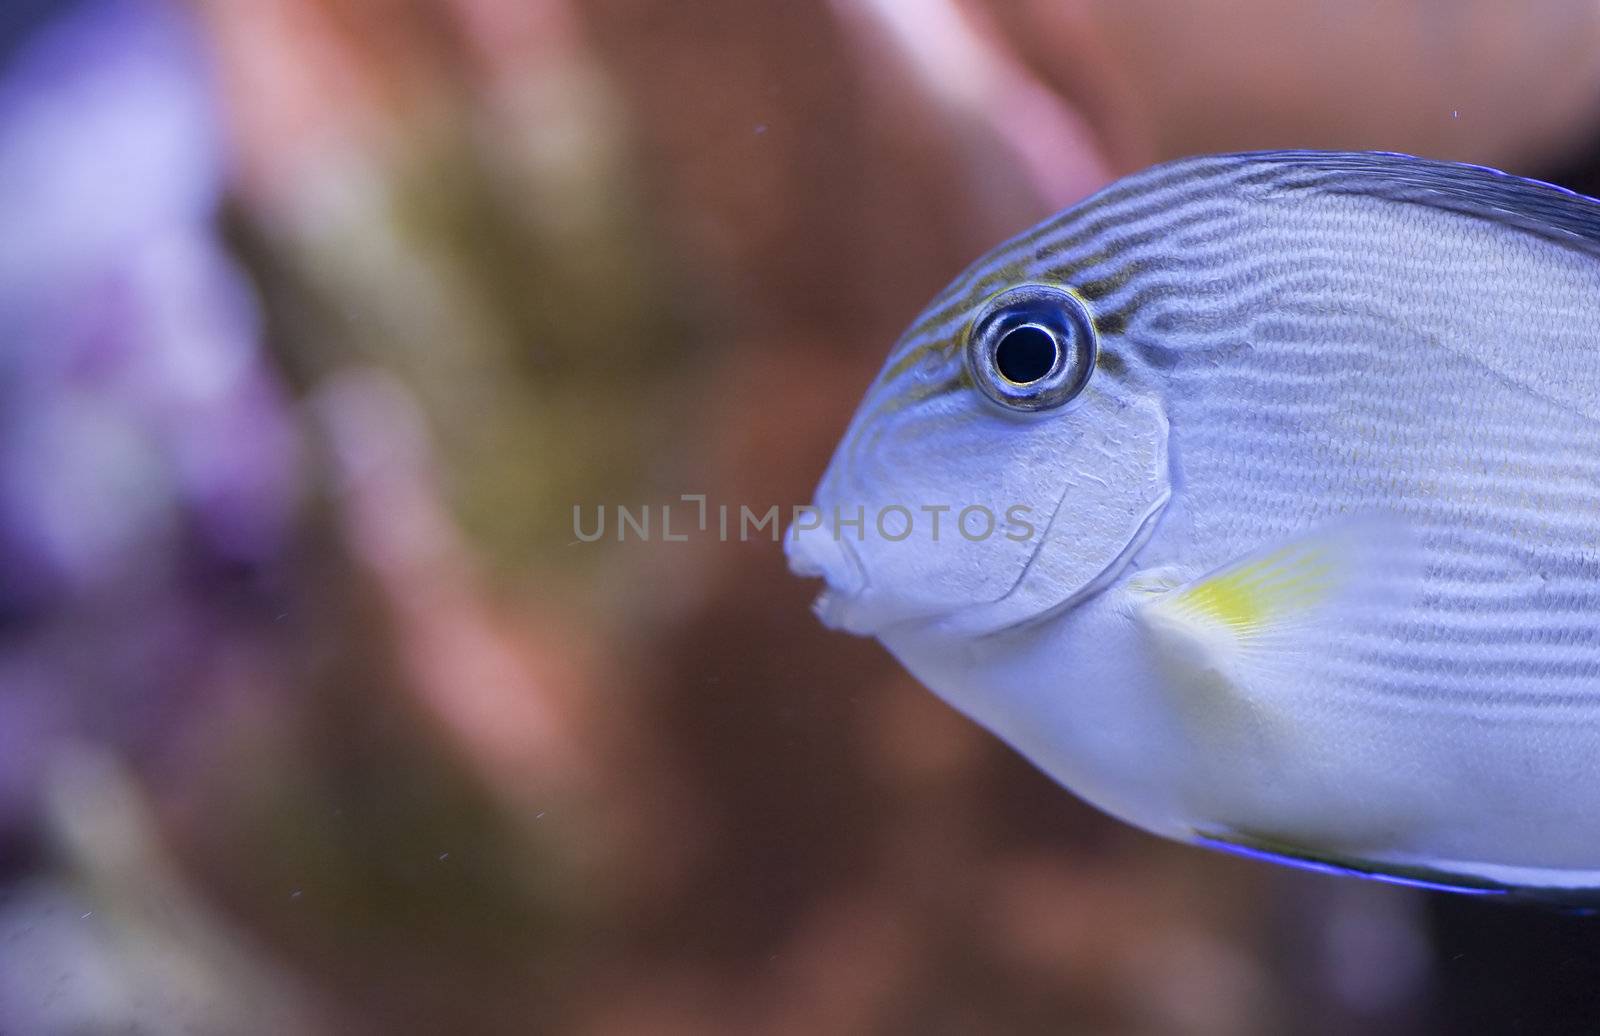 tropical animal in a salt water fish tank aquarium under water. Flash light can kill the animals so the photo was taken with available lights and reflectors 